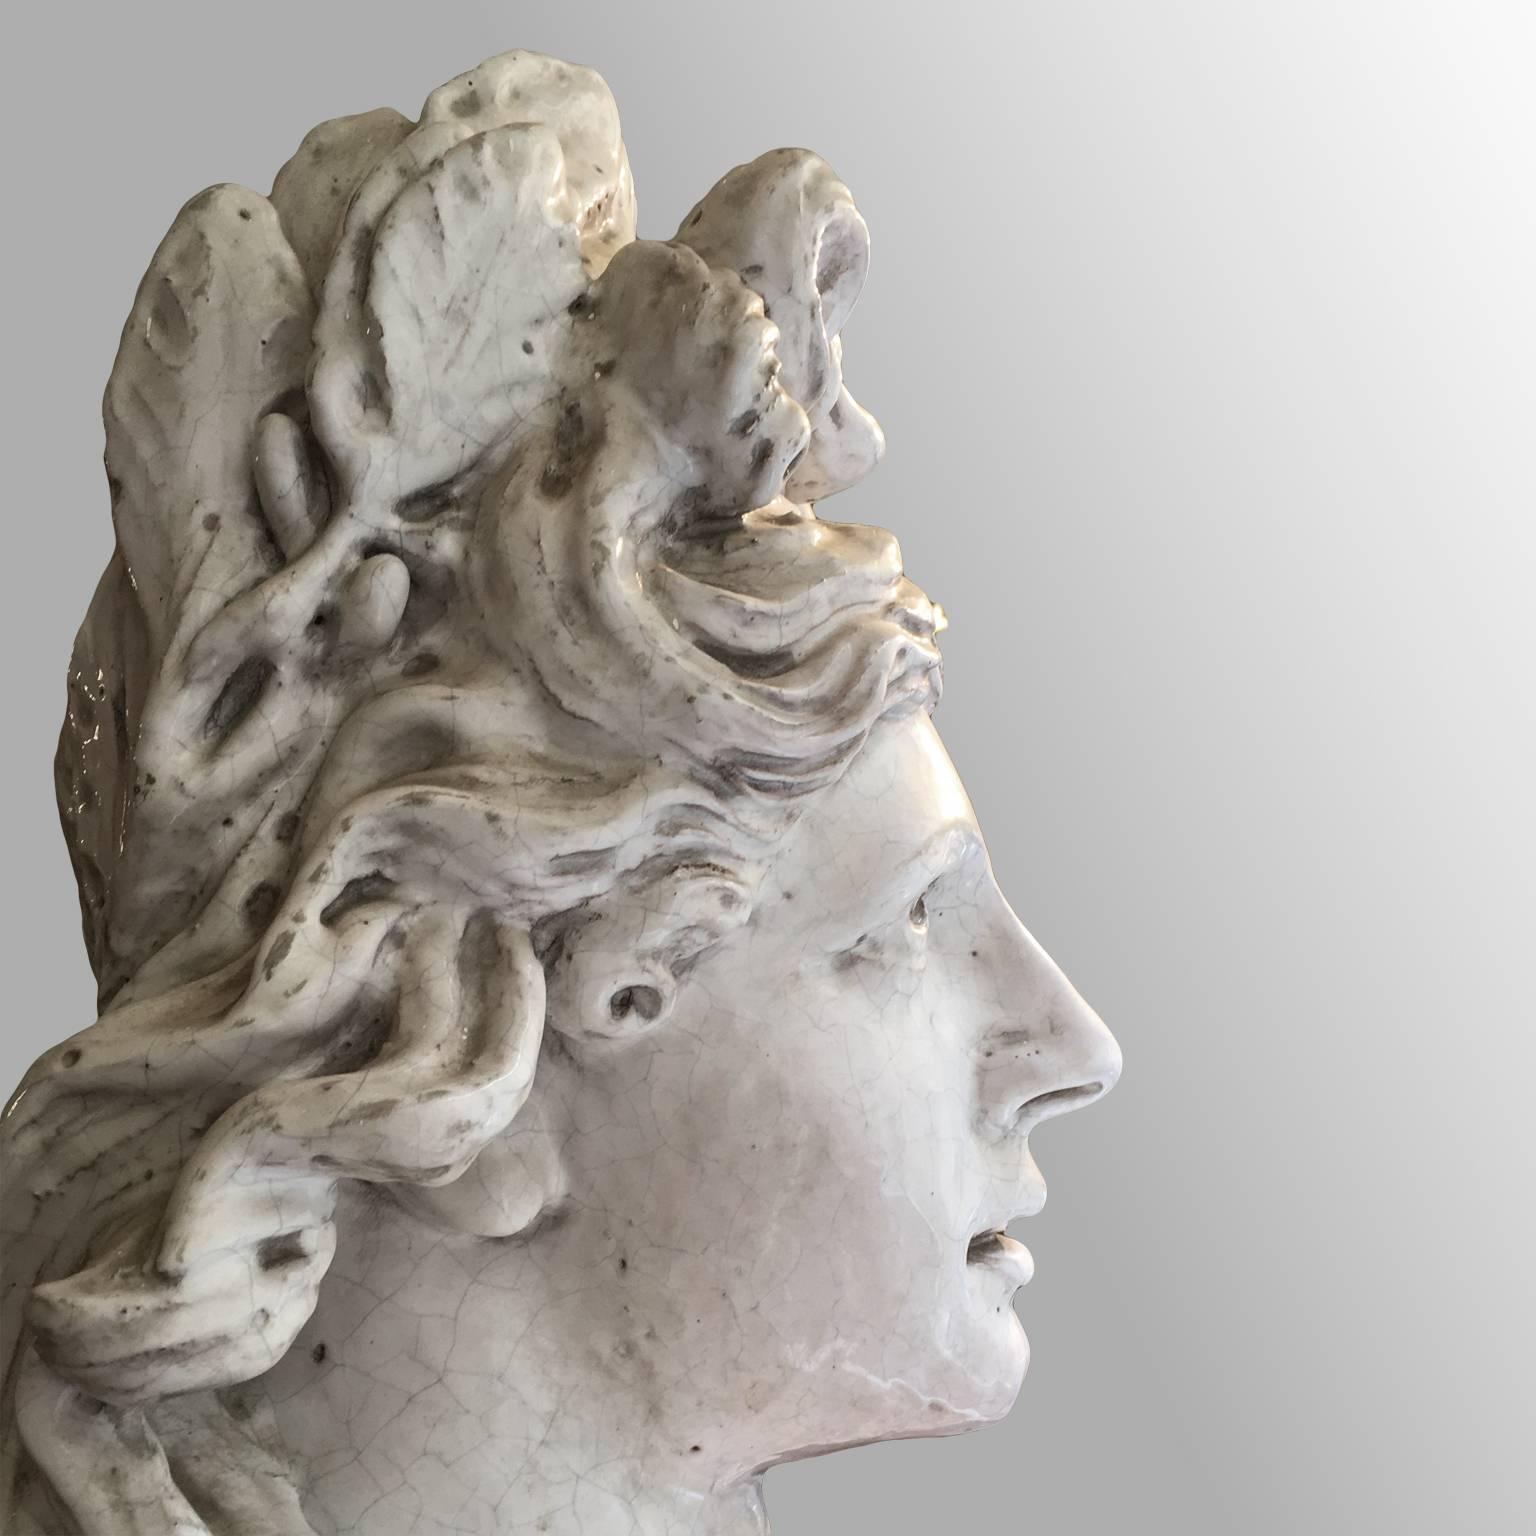 A stunning Italian terracotta bust of great size
Bust depicting a female figure with a laurel crown, the allegory of victory.
The beautiful bust with its white, glazed surface
stands on a circular, colorful glazed terracotta base.
Italian